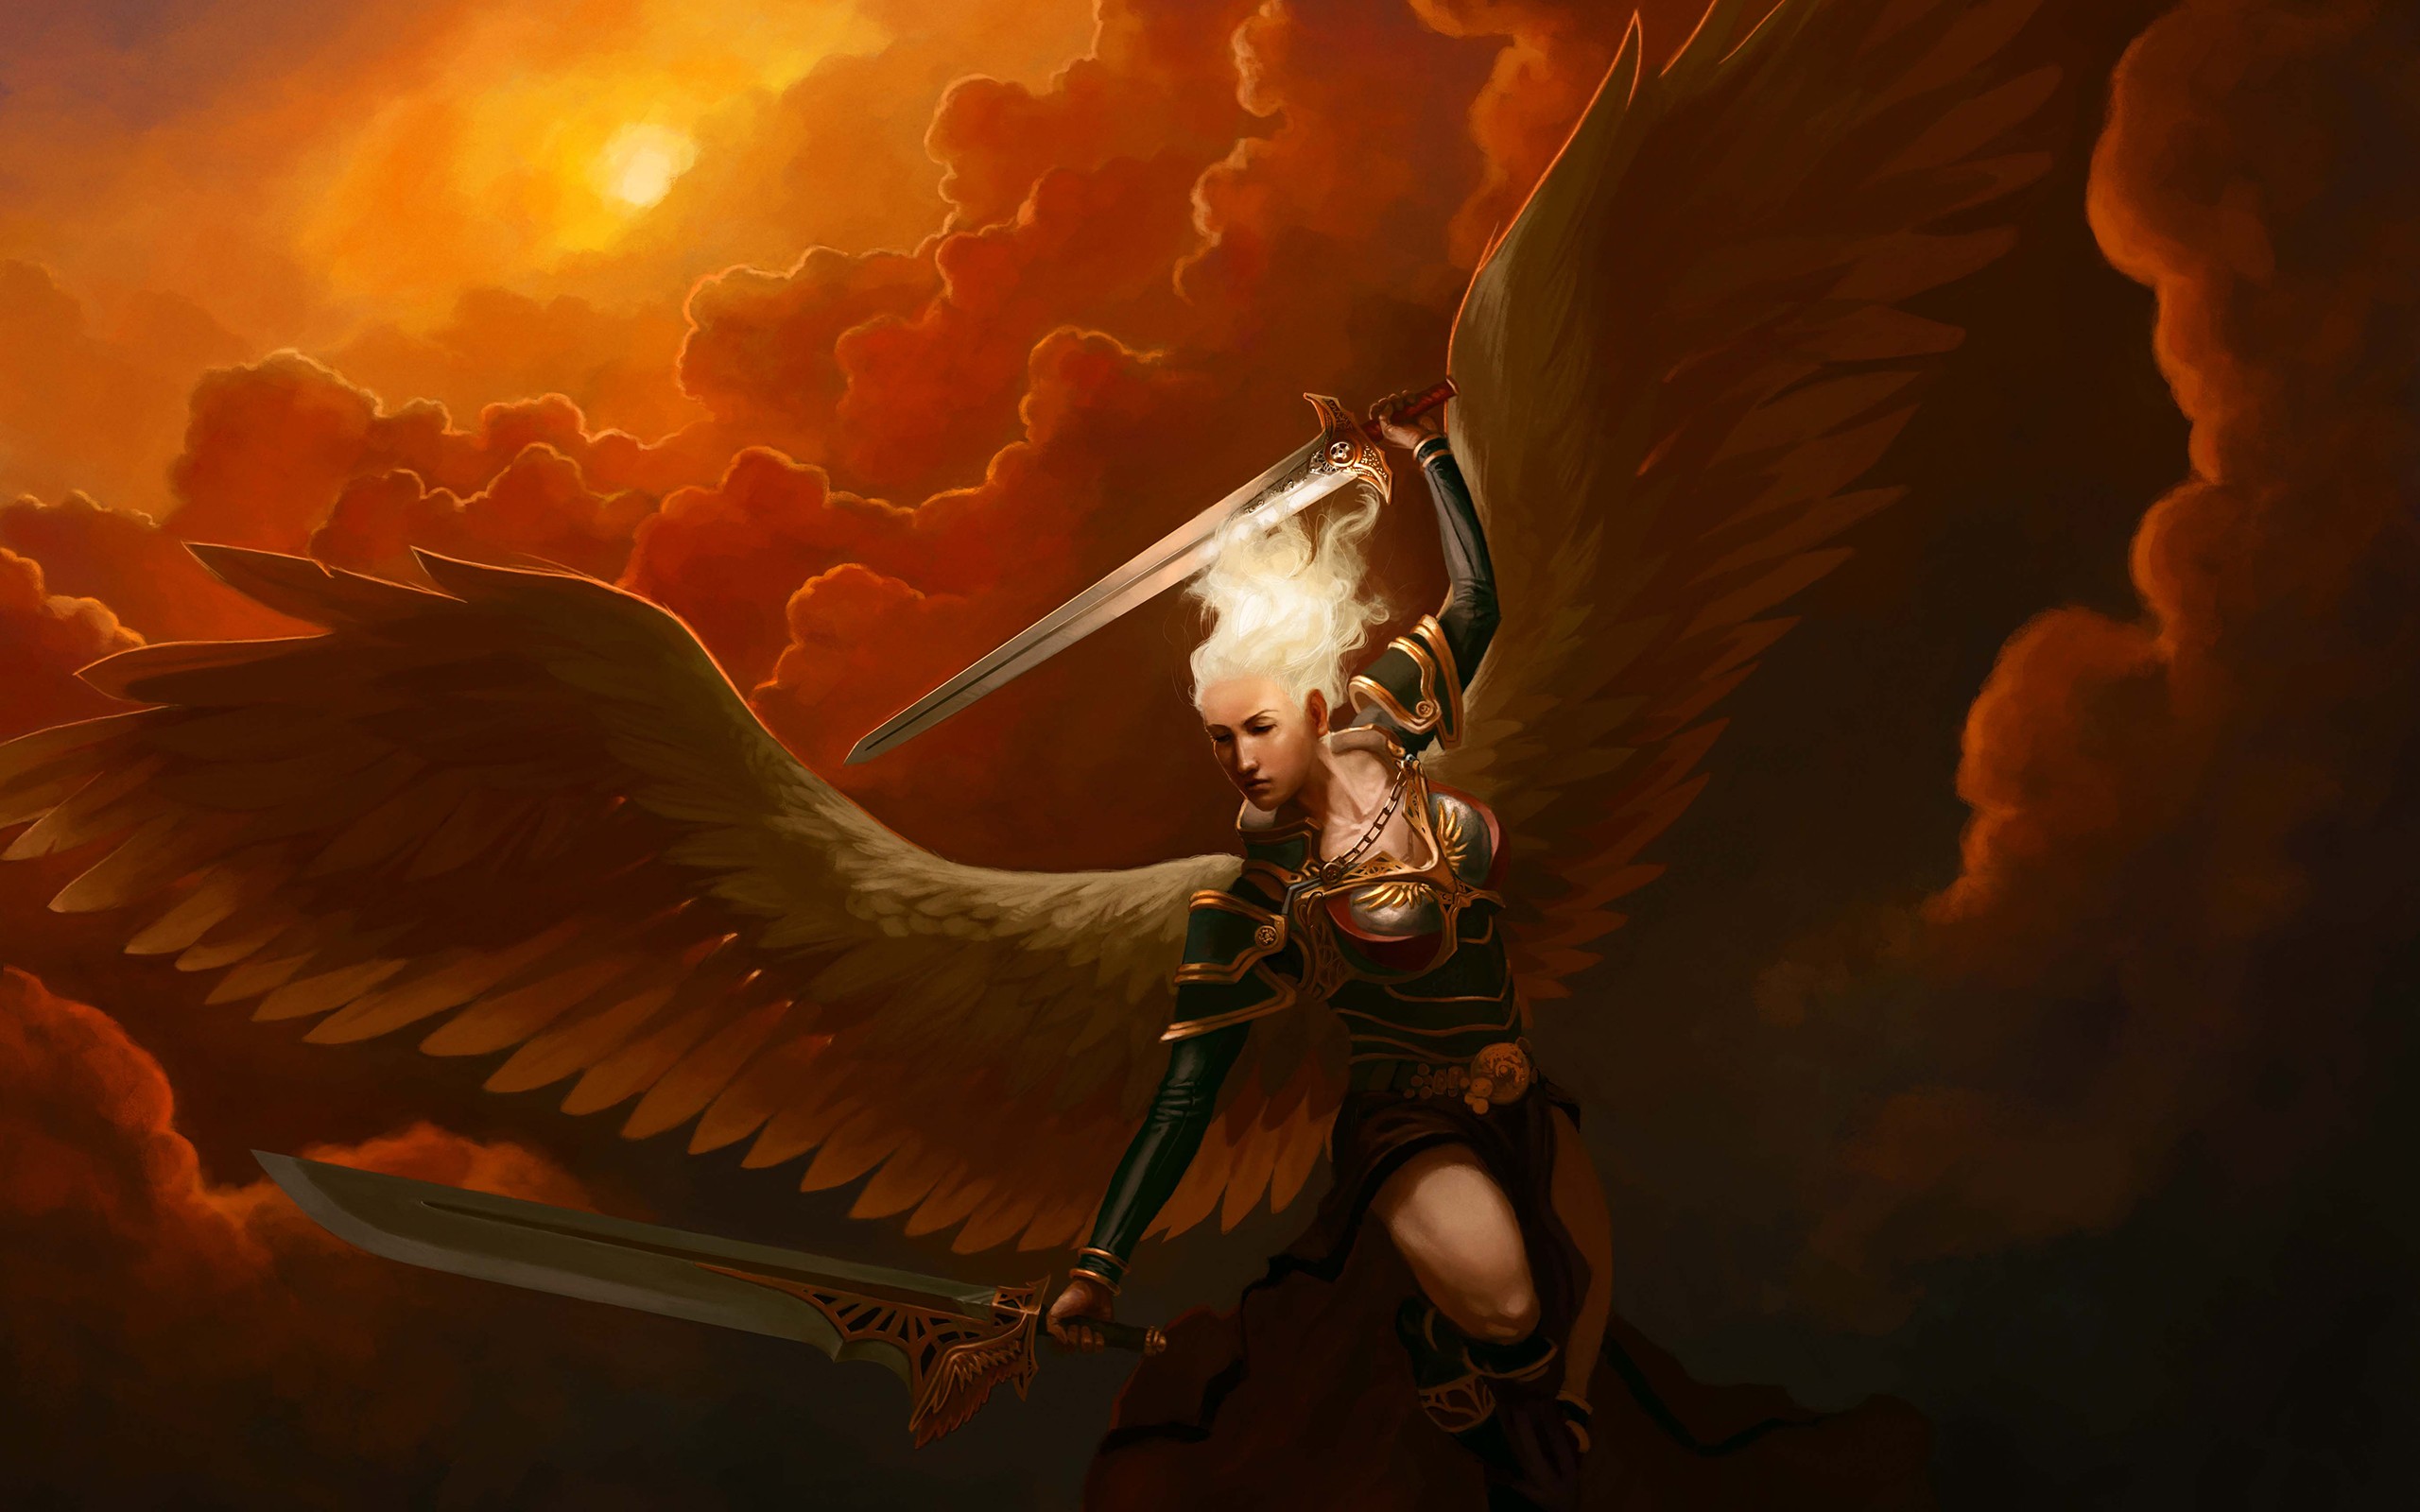 Malaikat - Angel With Wings And Sword - HD Wallpaper 